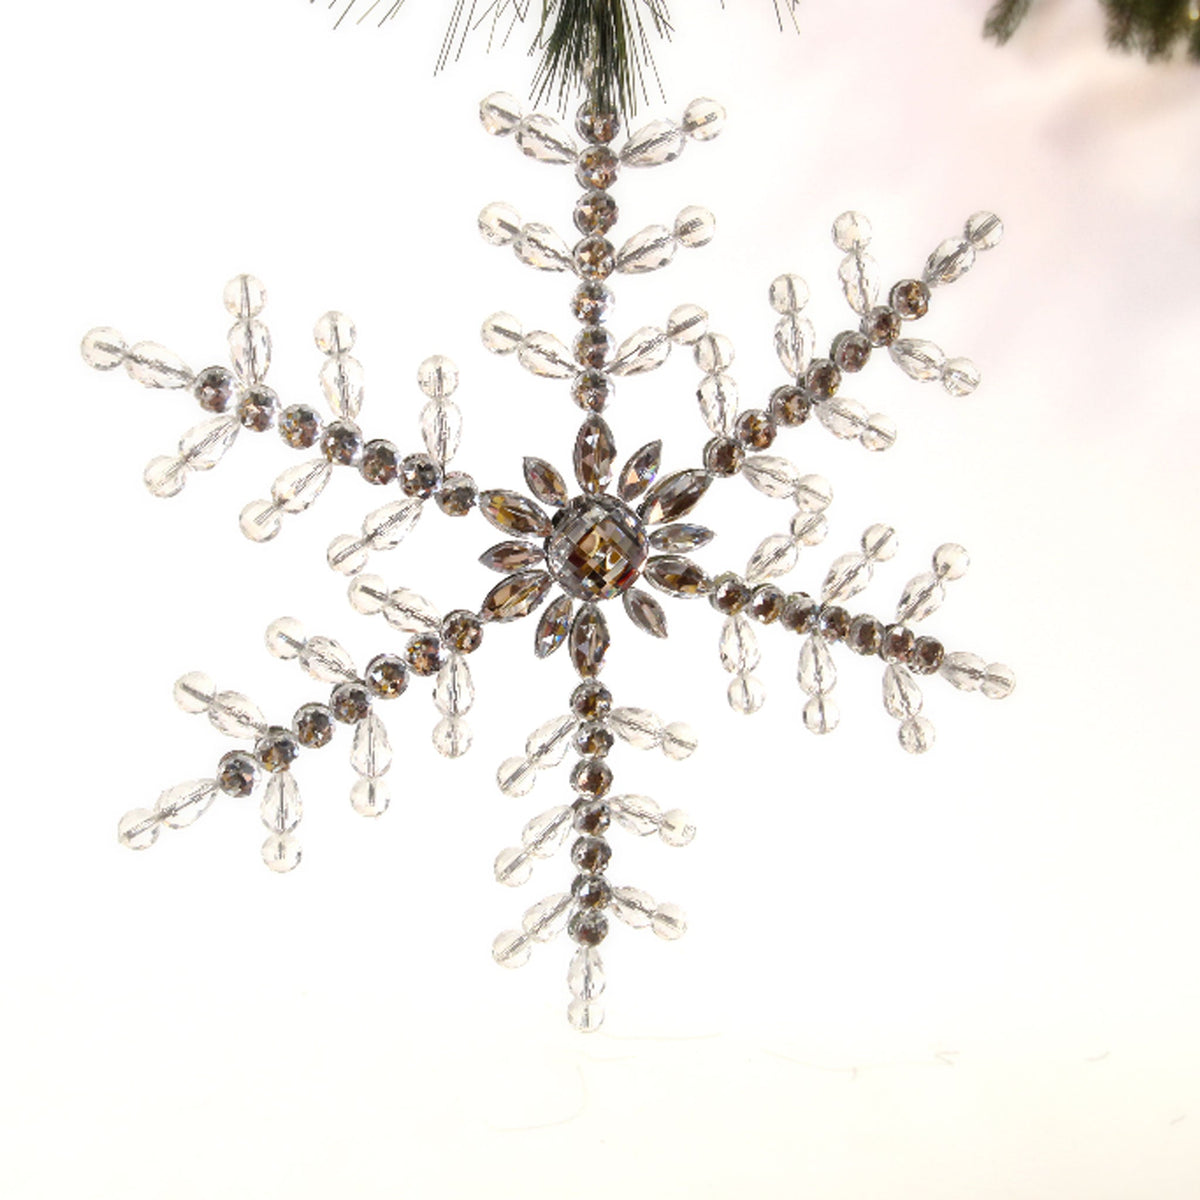 SnowSparkle Acrylic Snowflakes For Christmas Tree Glitter Winter Ornaments,  Ideal For Indoor/Outdoor Décor. From Mozifang, $8.59